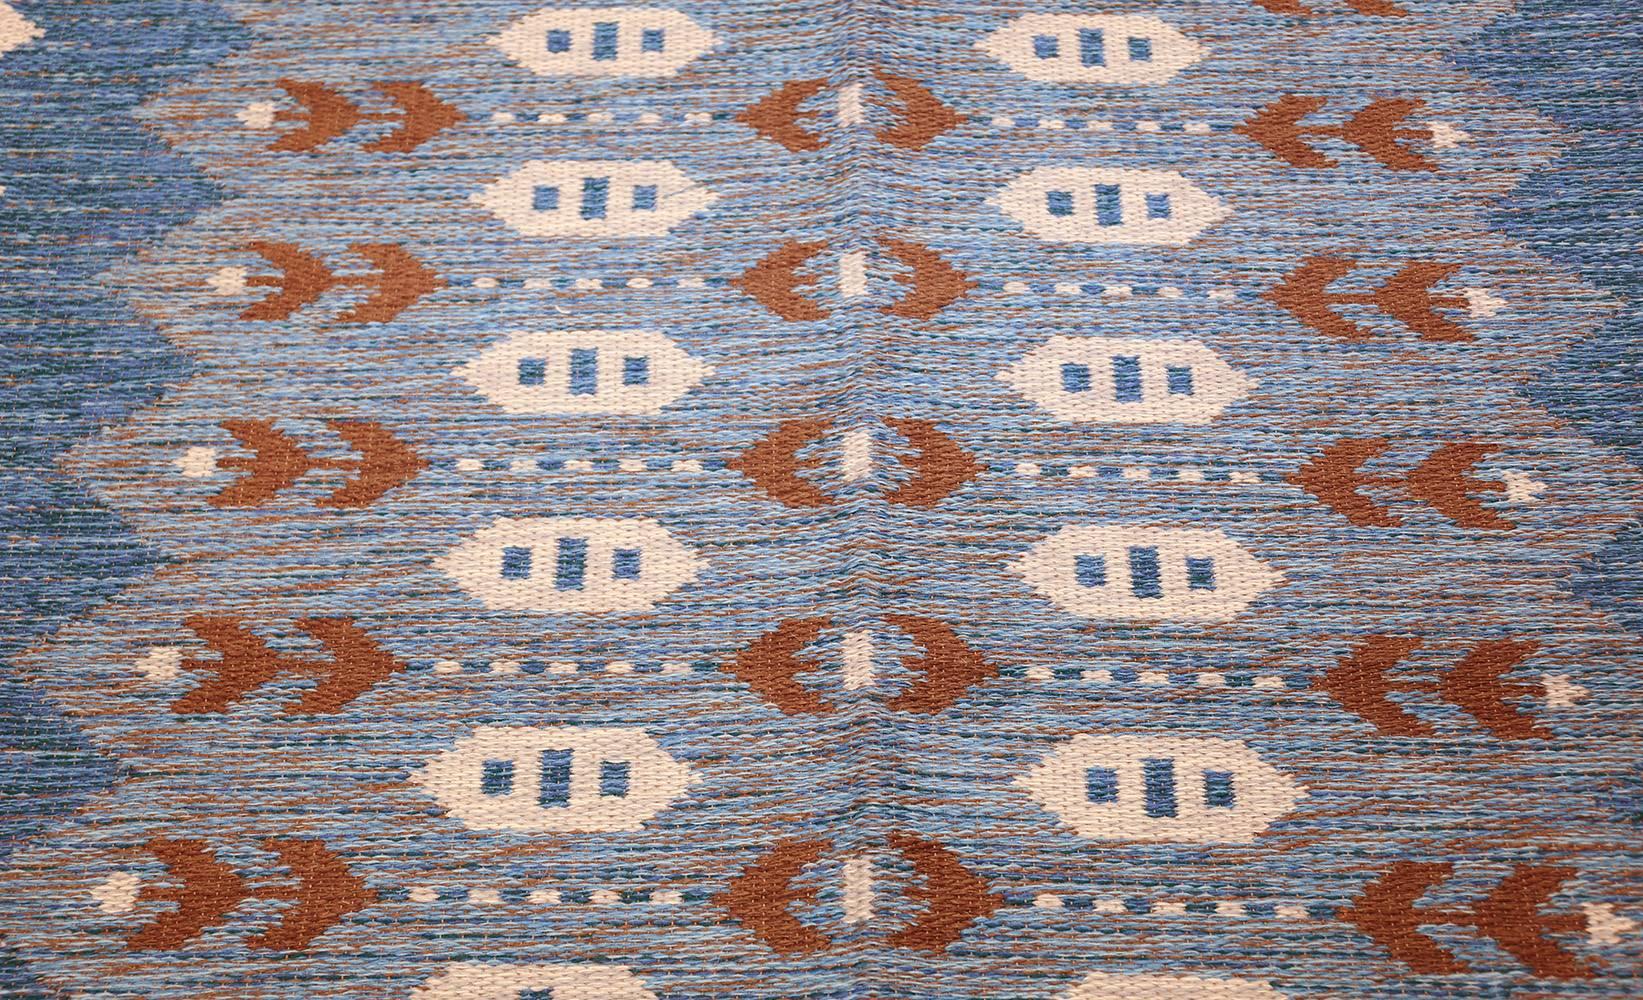 Vintage Swedish Double Sided Rug, Origin: Sweden, Mid-20th Century – Size: 4 ft 8 in x 6 ft 3 in (1.42 m x 1.9 m)

Here is a charming vintage carpet – a mid-century Swedish kilim, woven in Scandinavia during the middle years of the twentieth